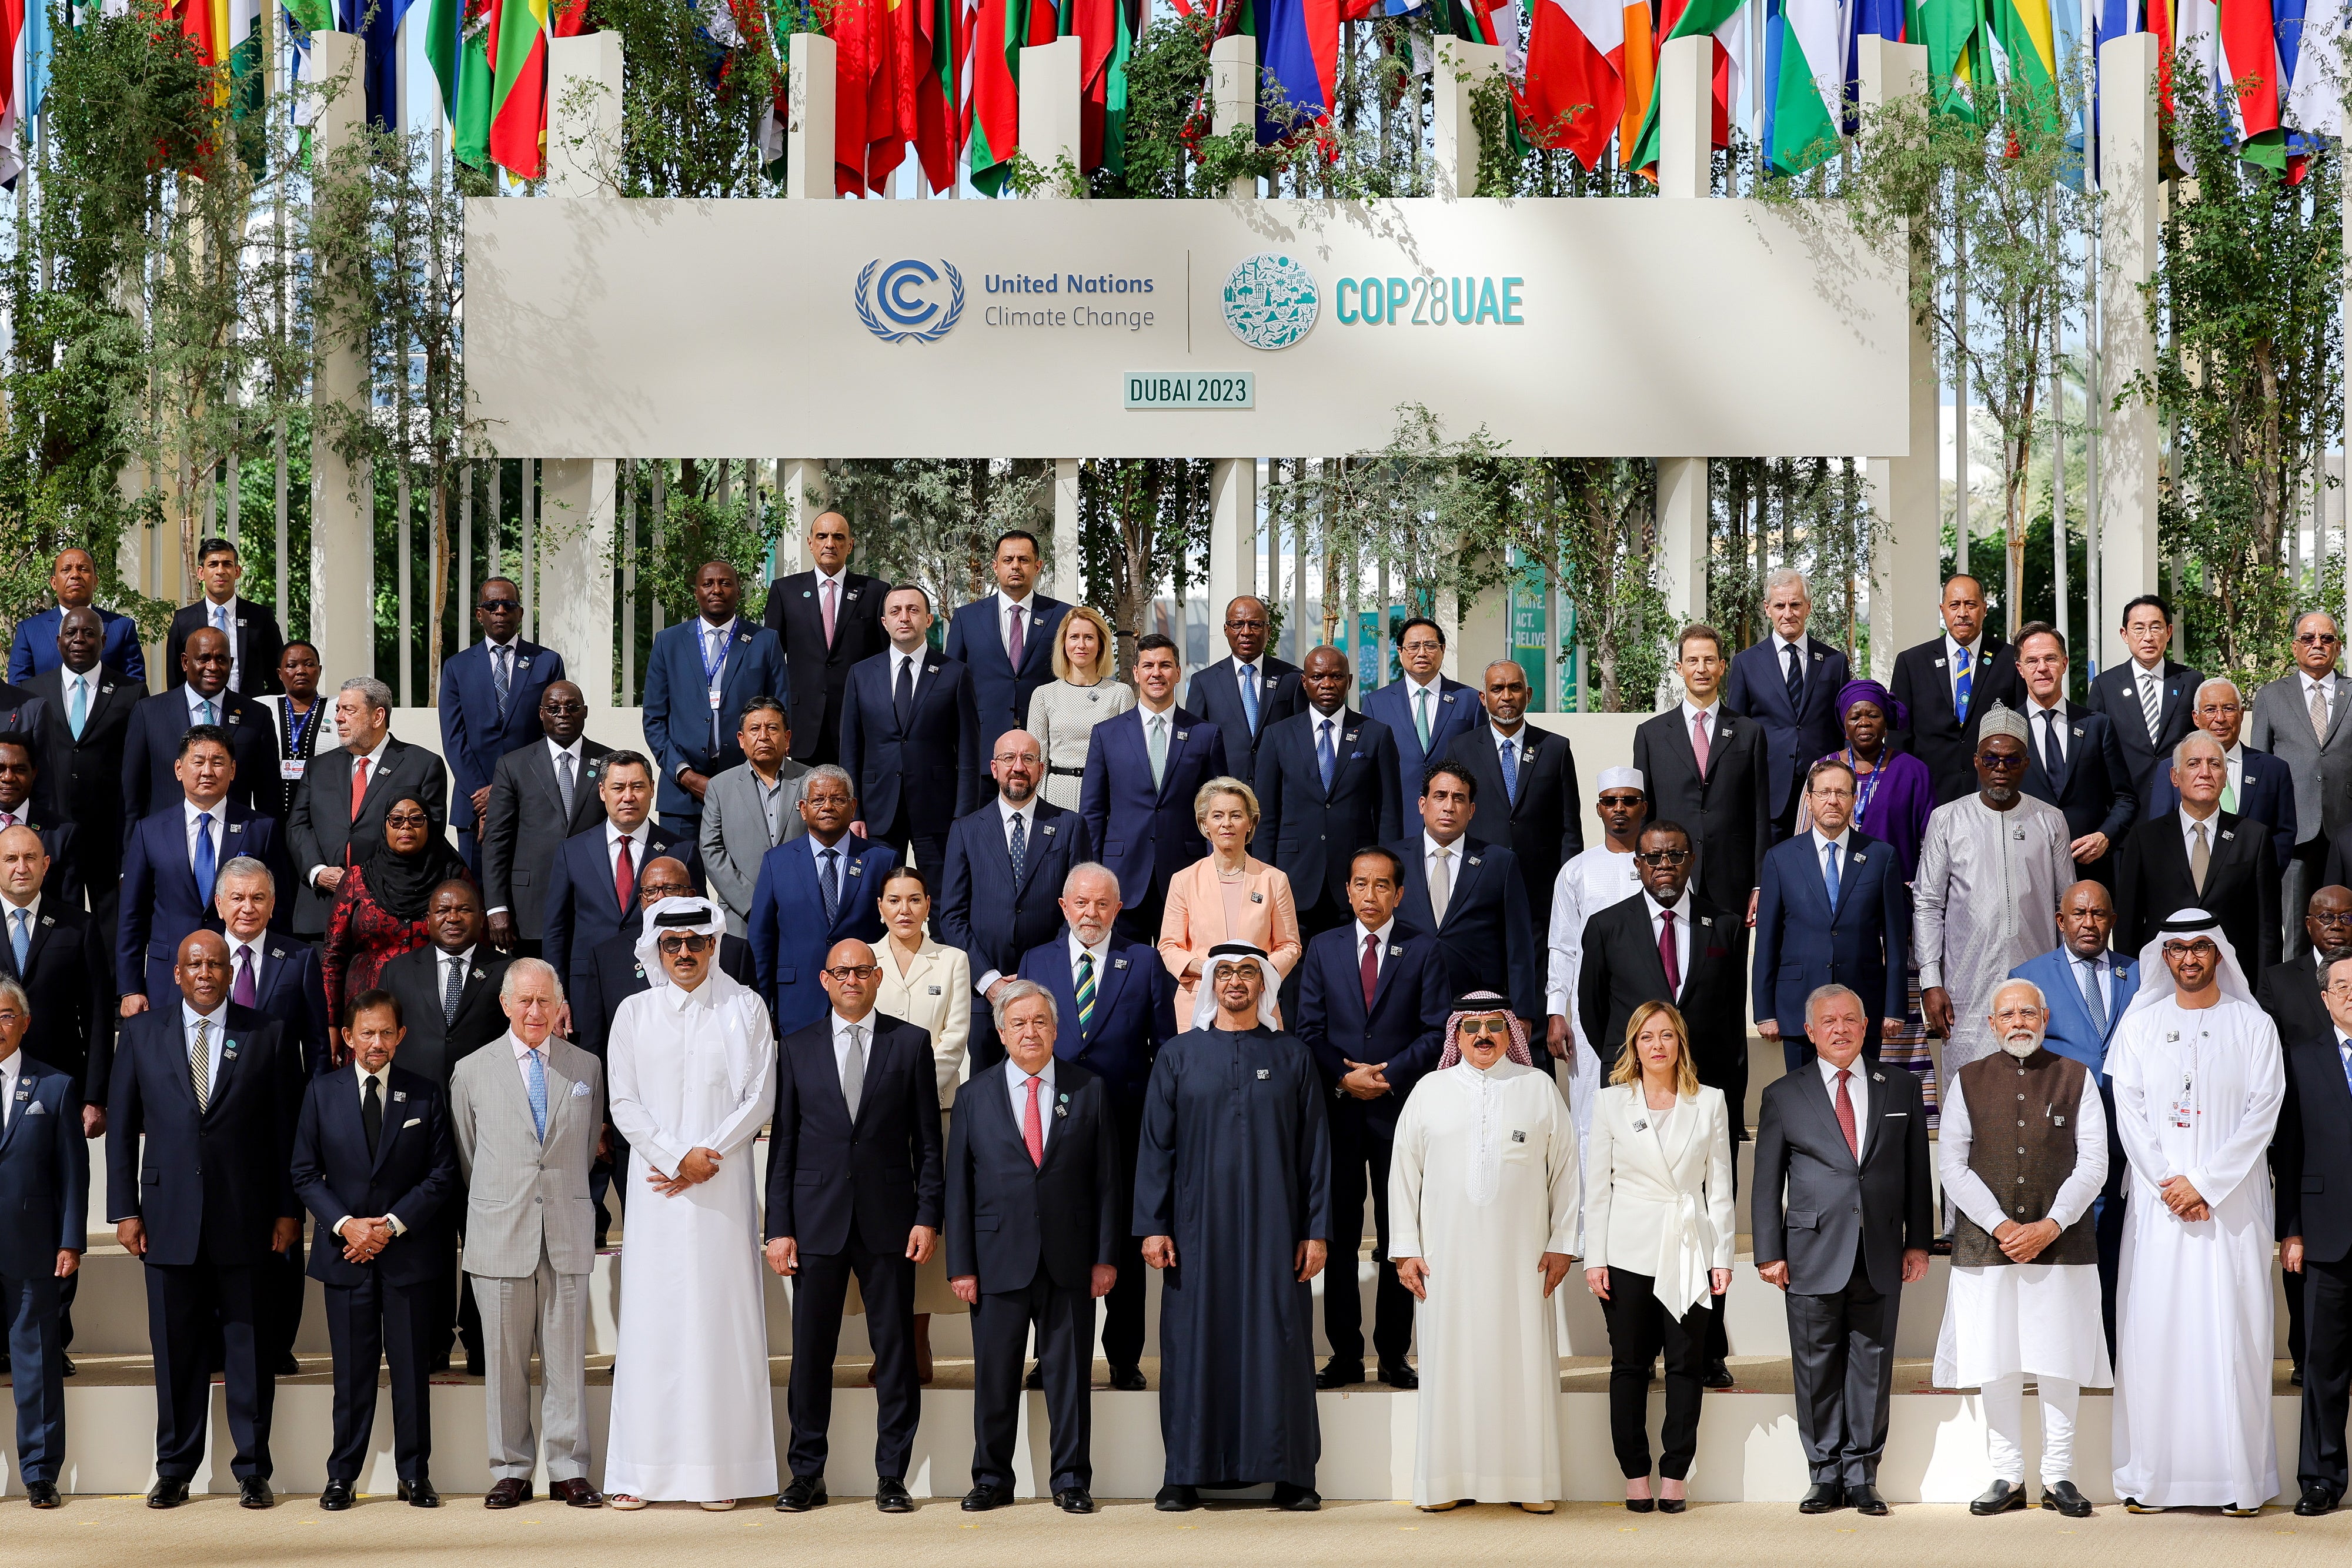 Leaders posing during a ‘family photo’ at Cop28. It makes clear that women are not adequately represented at the highest levels of global leadership